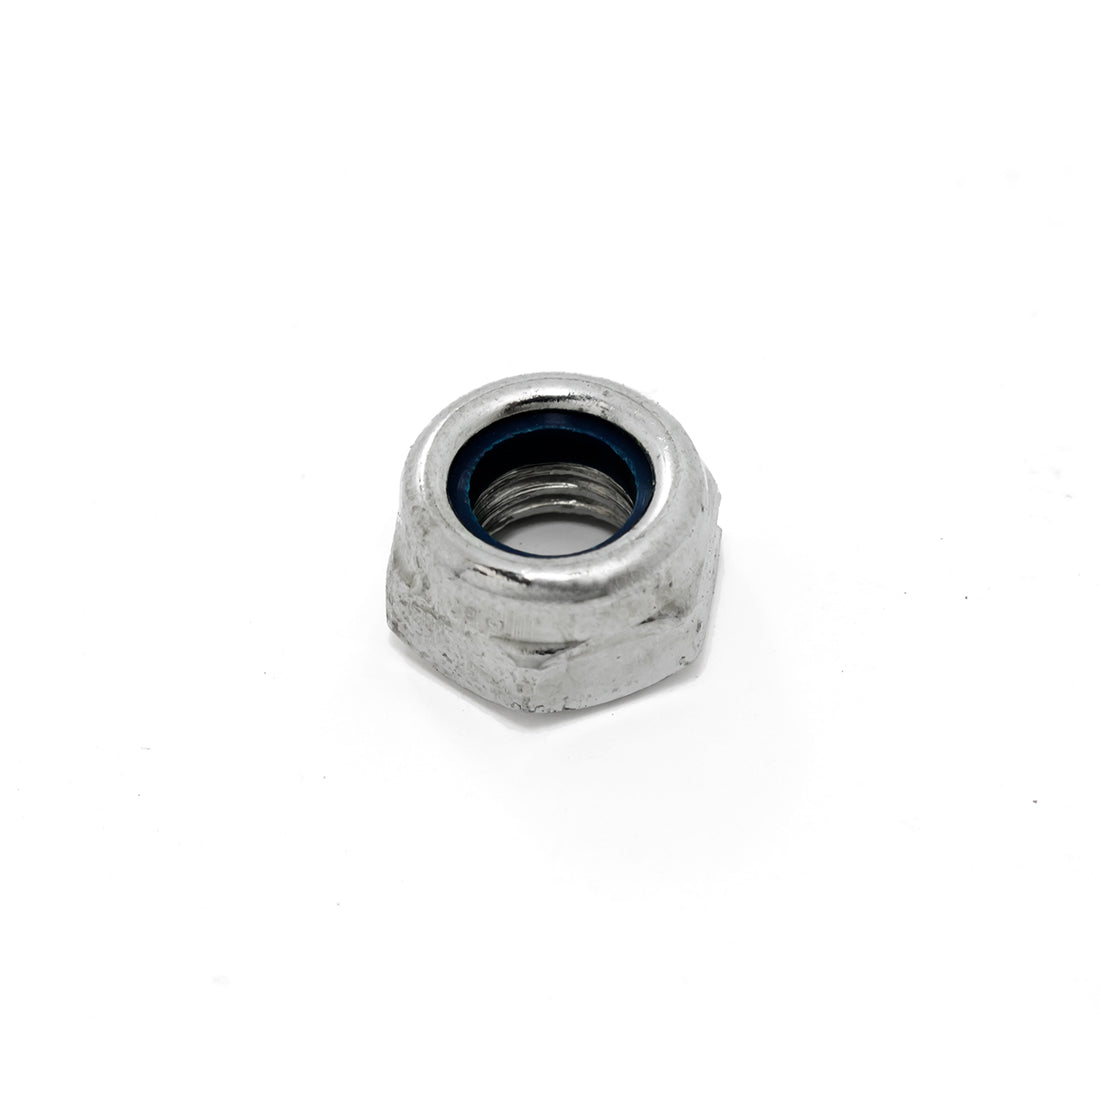 [MBA-028] M6 nut - (For Polisher)